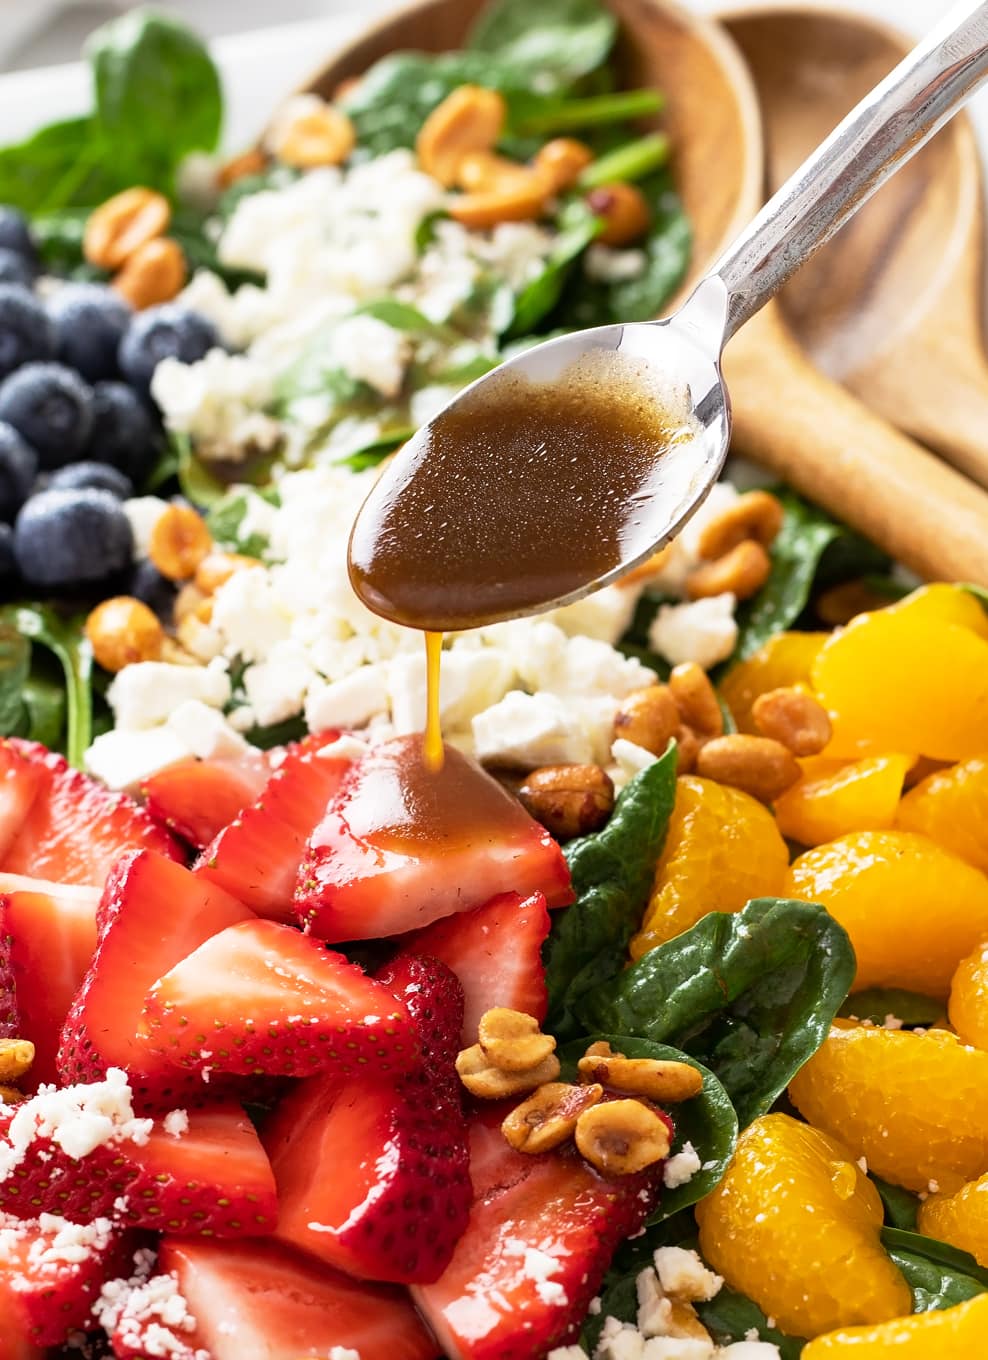 A spoonful of Balsamic Vinaigrette being drizzled onto a salad with spinach, strawberries, and feta.